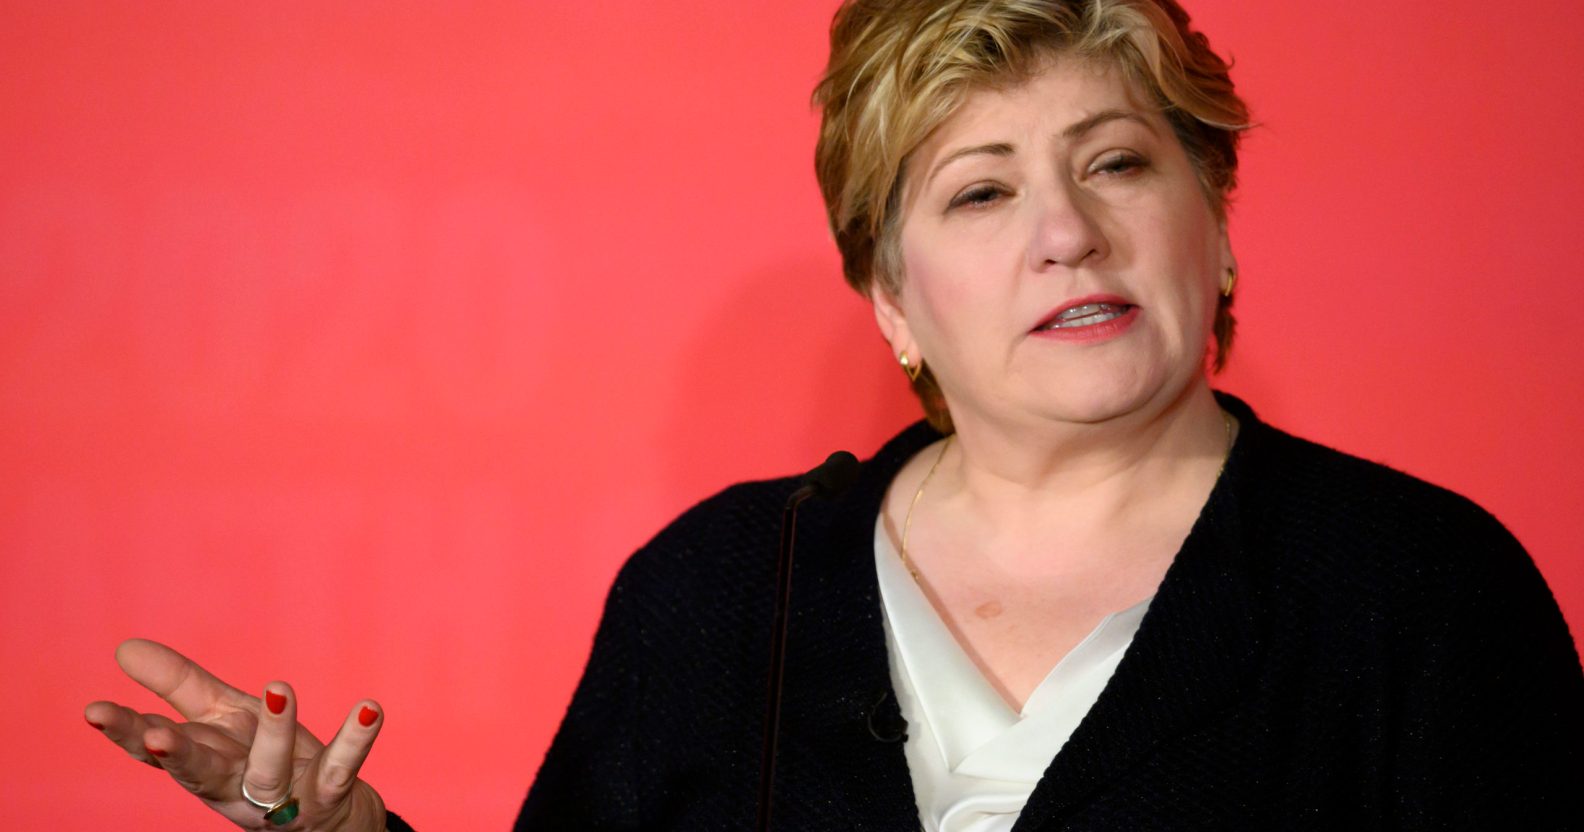 A cut-out of Emily Thornberry, Labour's shadow international trade secretary and MP for Islington South and Finsbury, wearing a black cardigan over a white top as she gestures with her right hand against a pink background